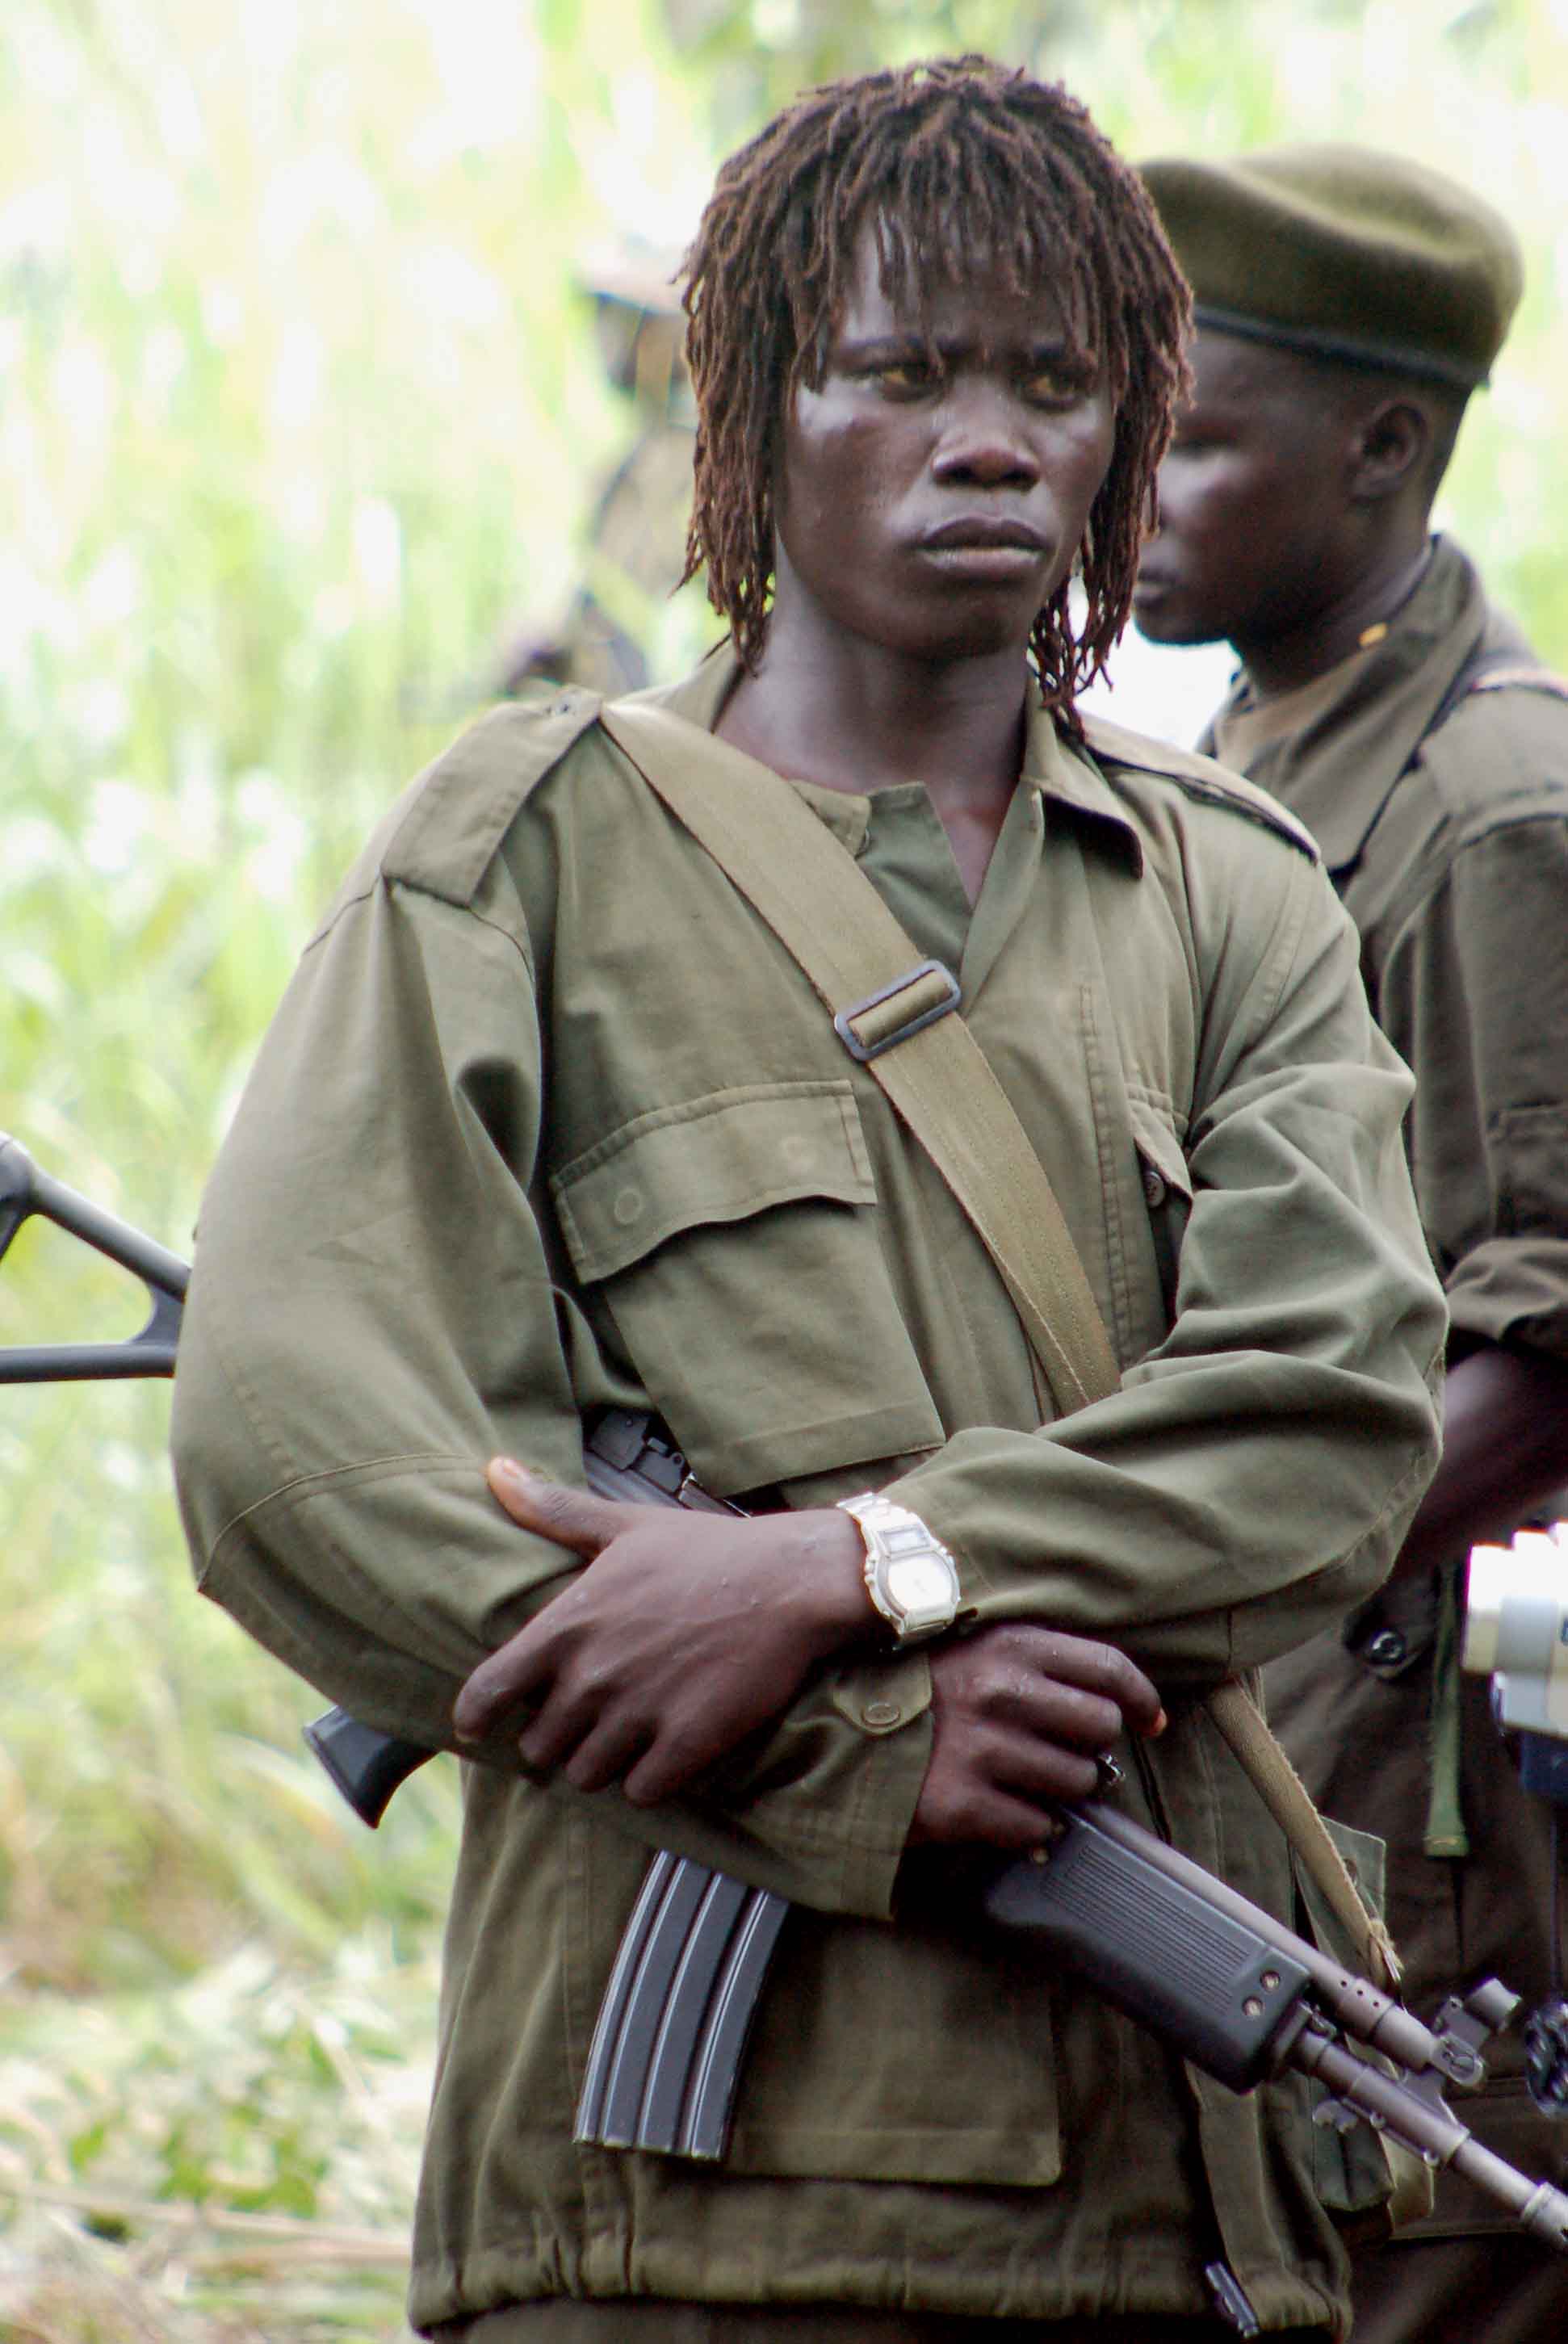 New Enough Issue Brief Highlights the Problem of Access in the Hunt for the LRA